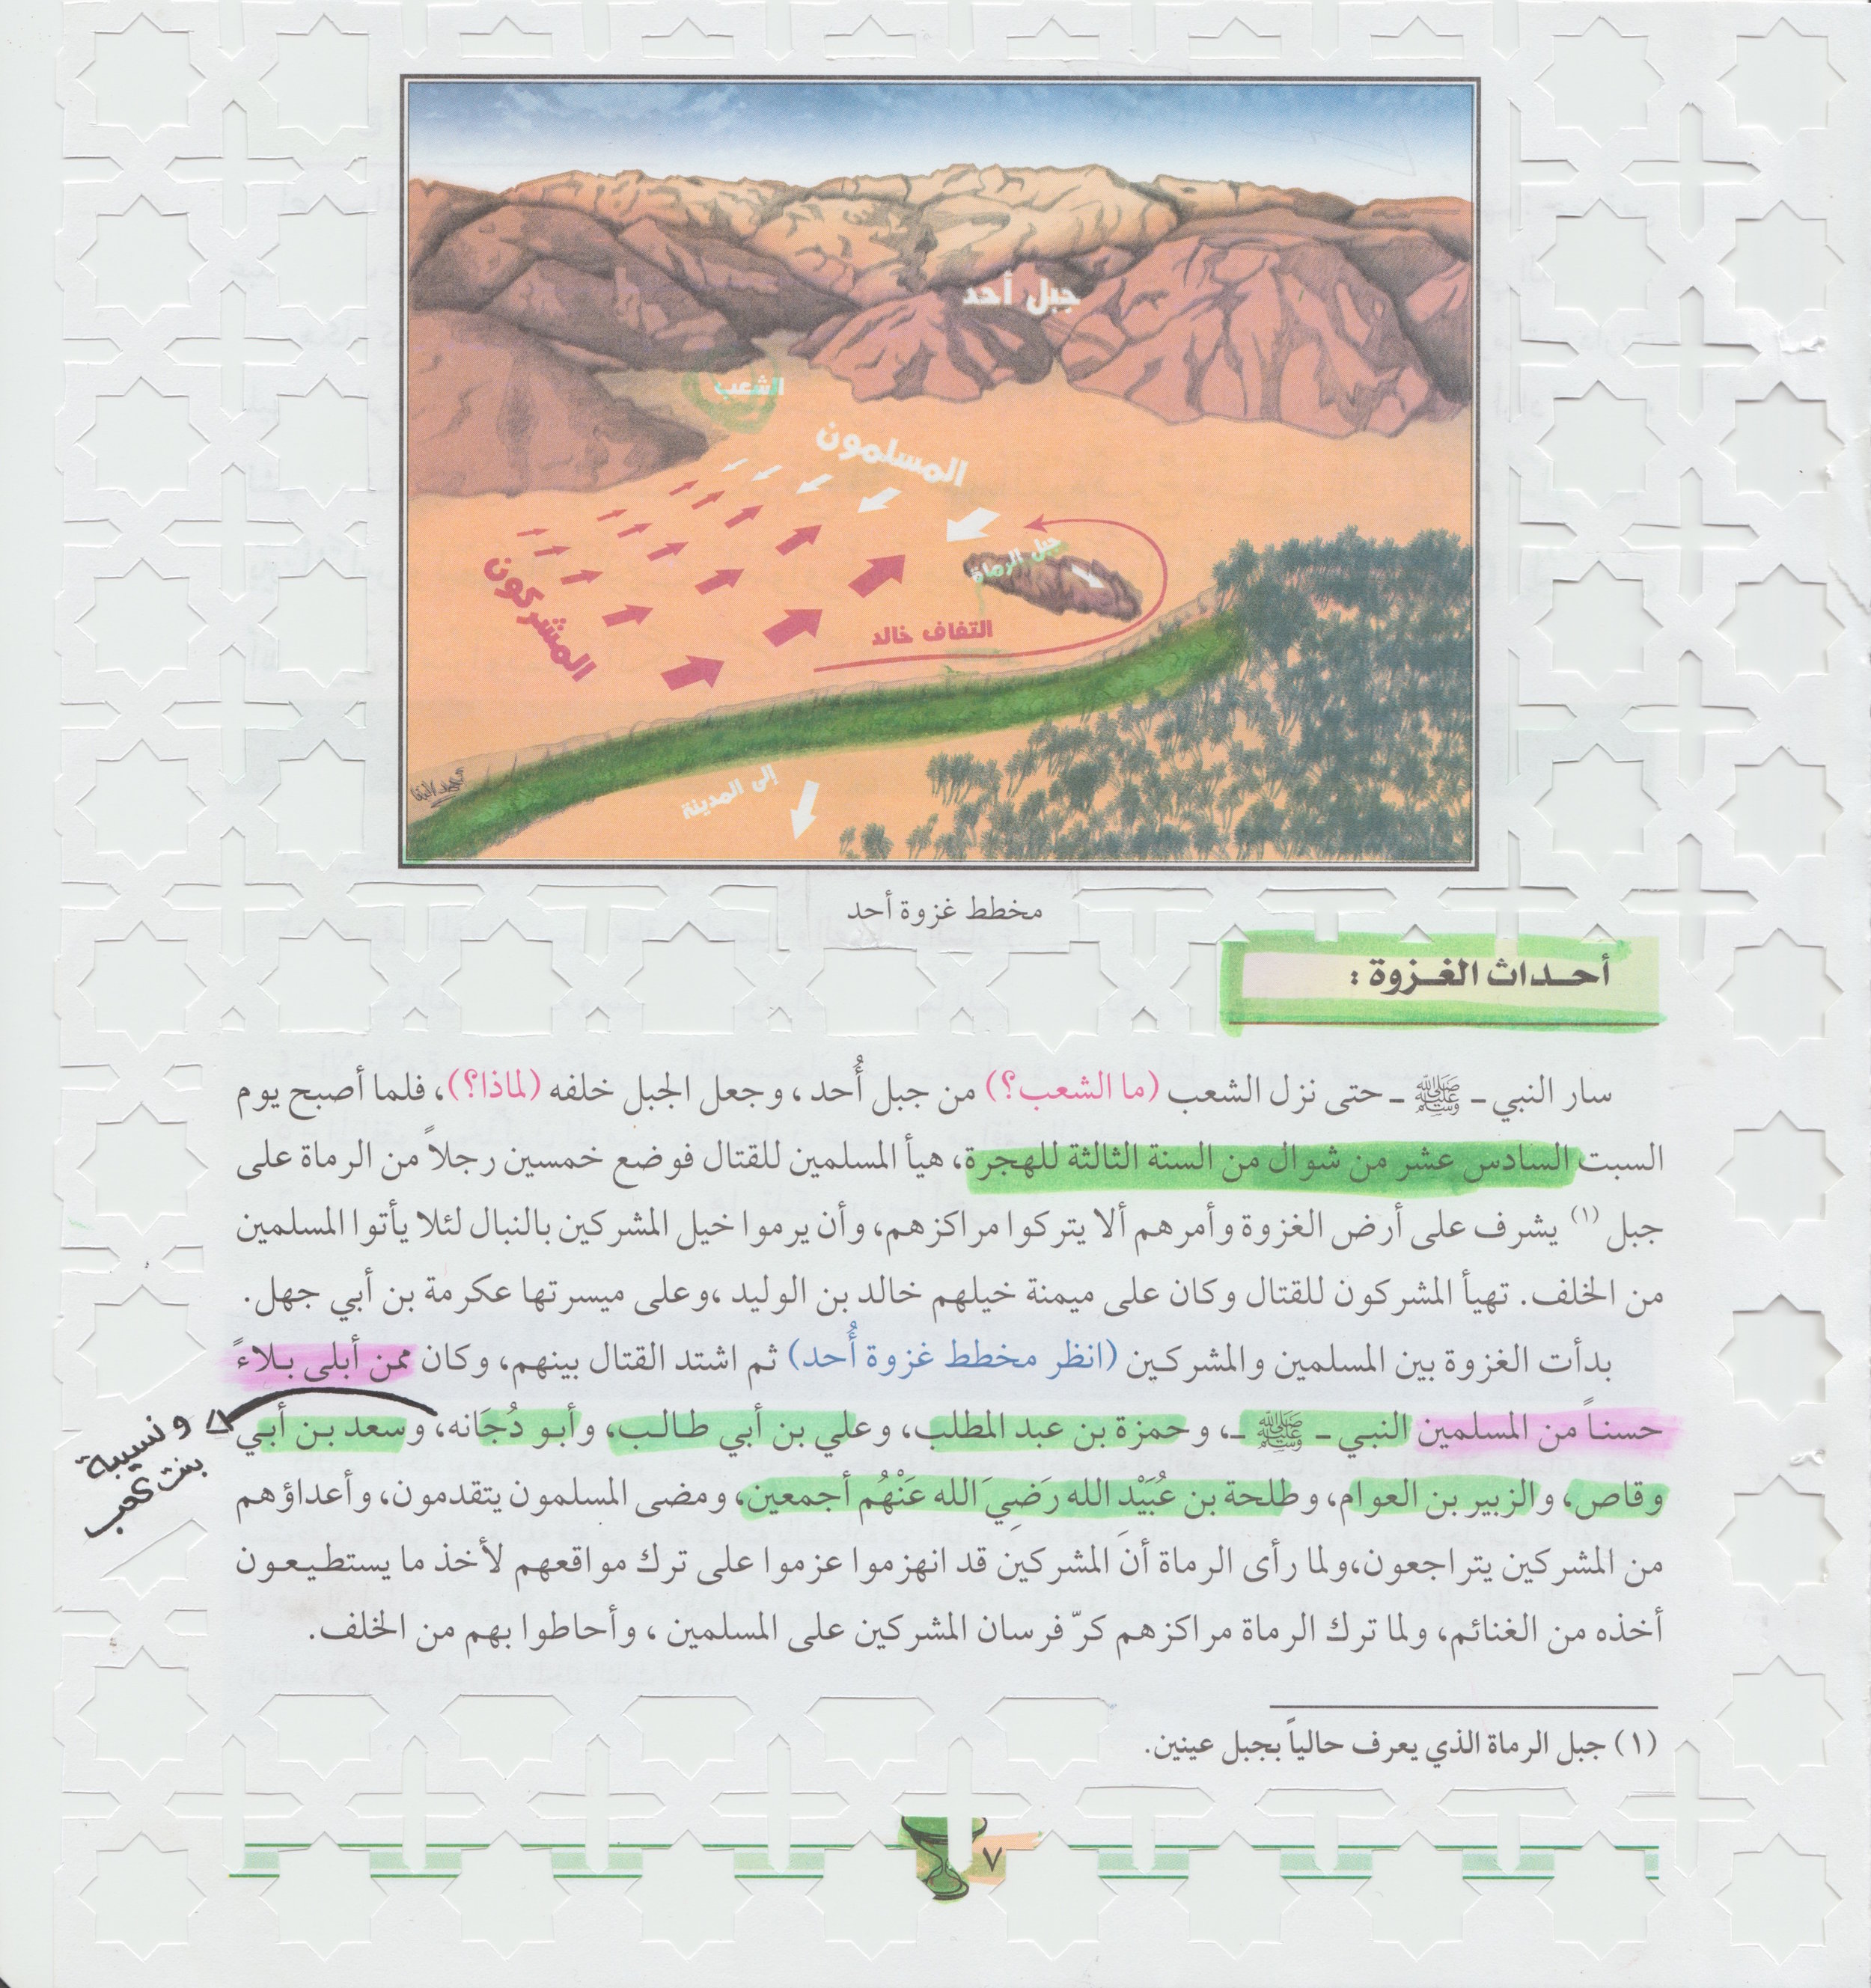 Nuseiba Bint Ka’ab & The Battle of Uhud, Altered page from school book, from S(HE) series.jpeg